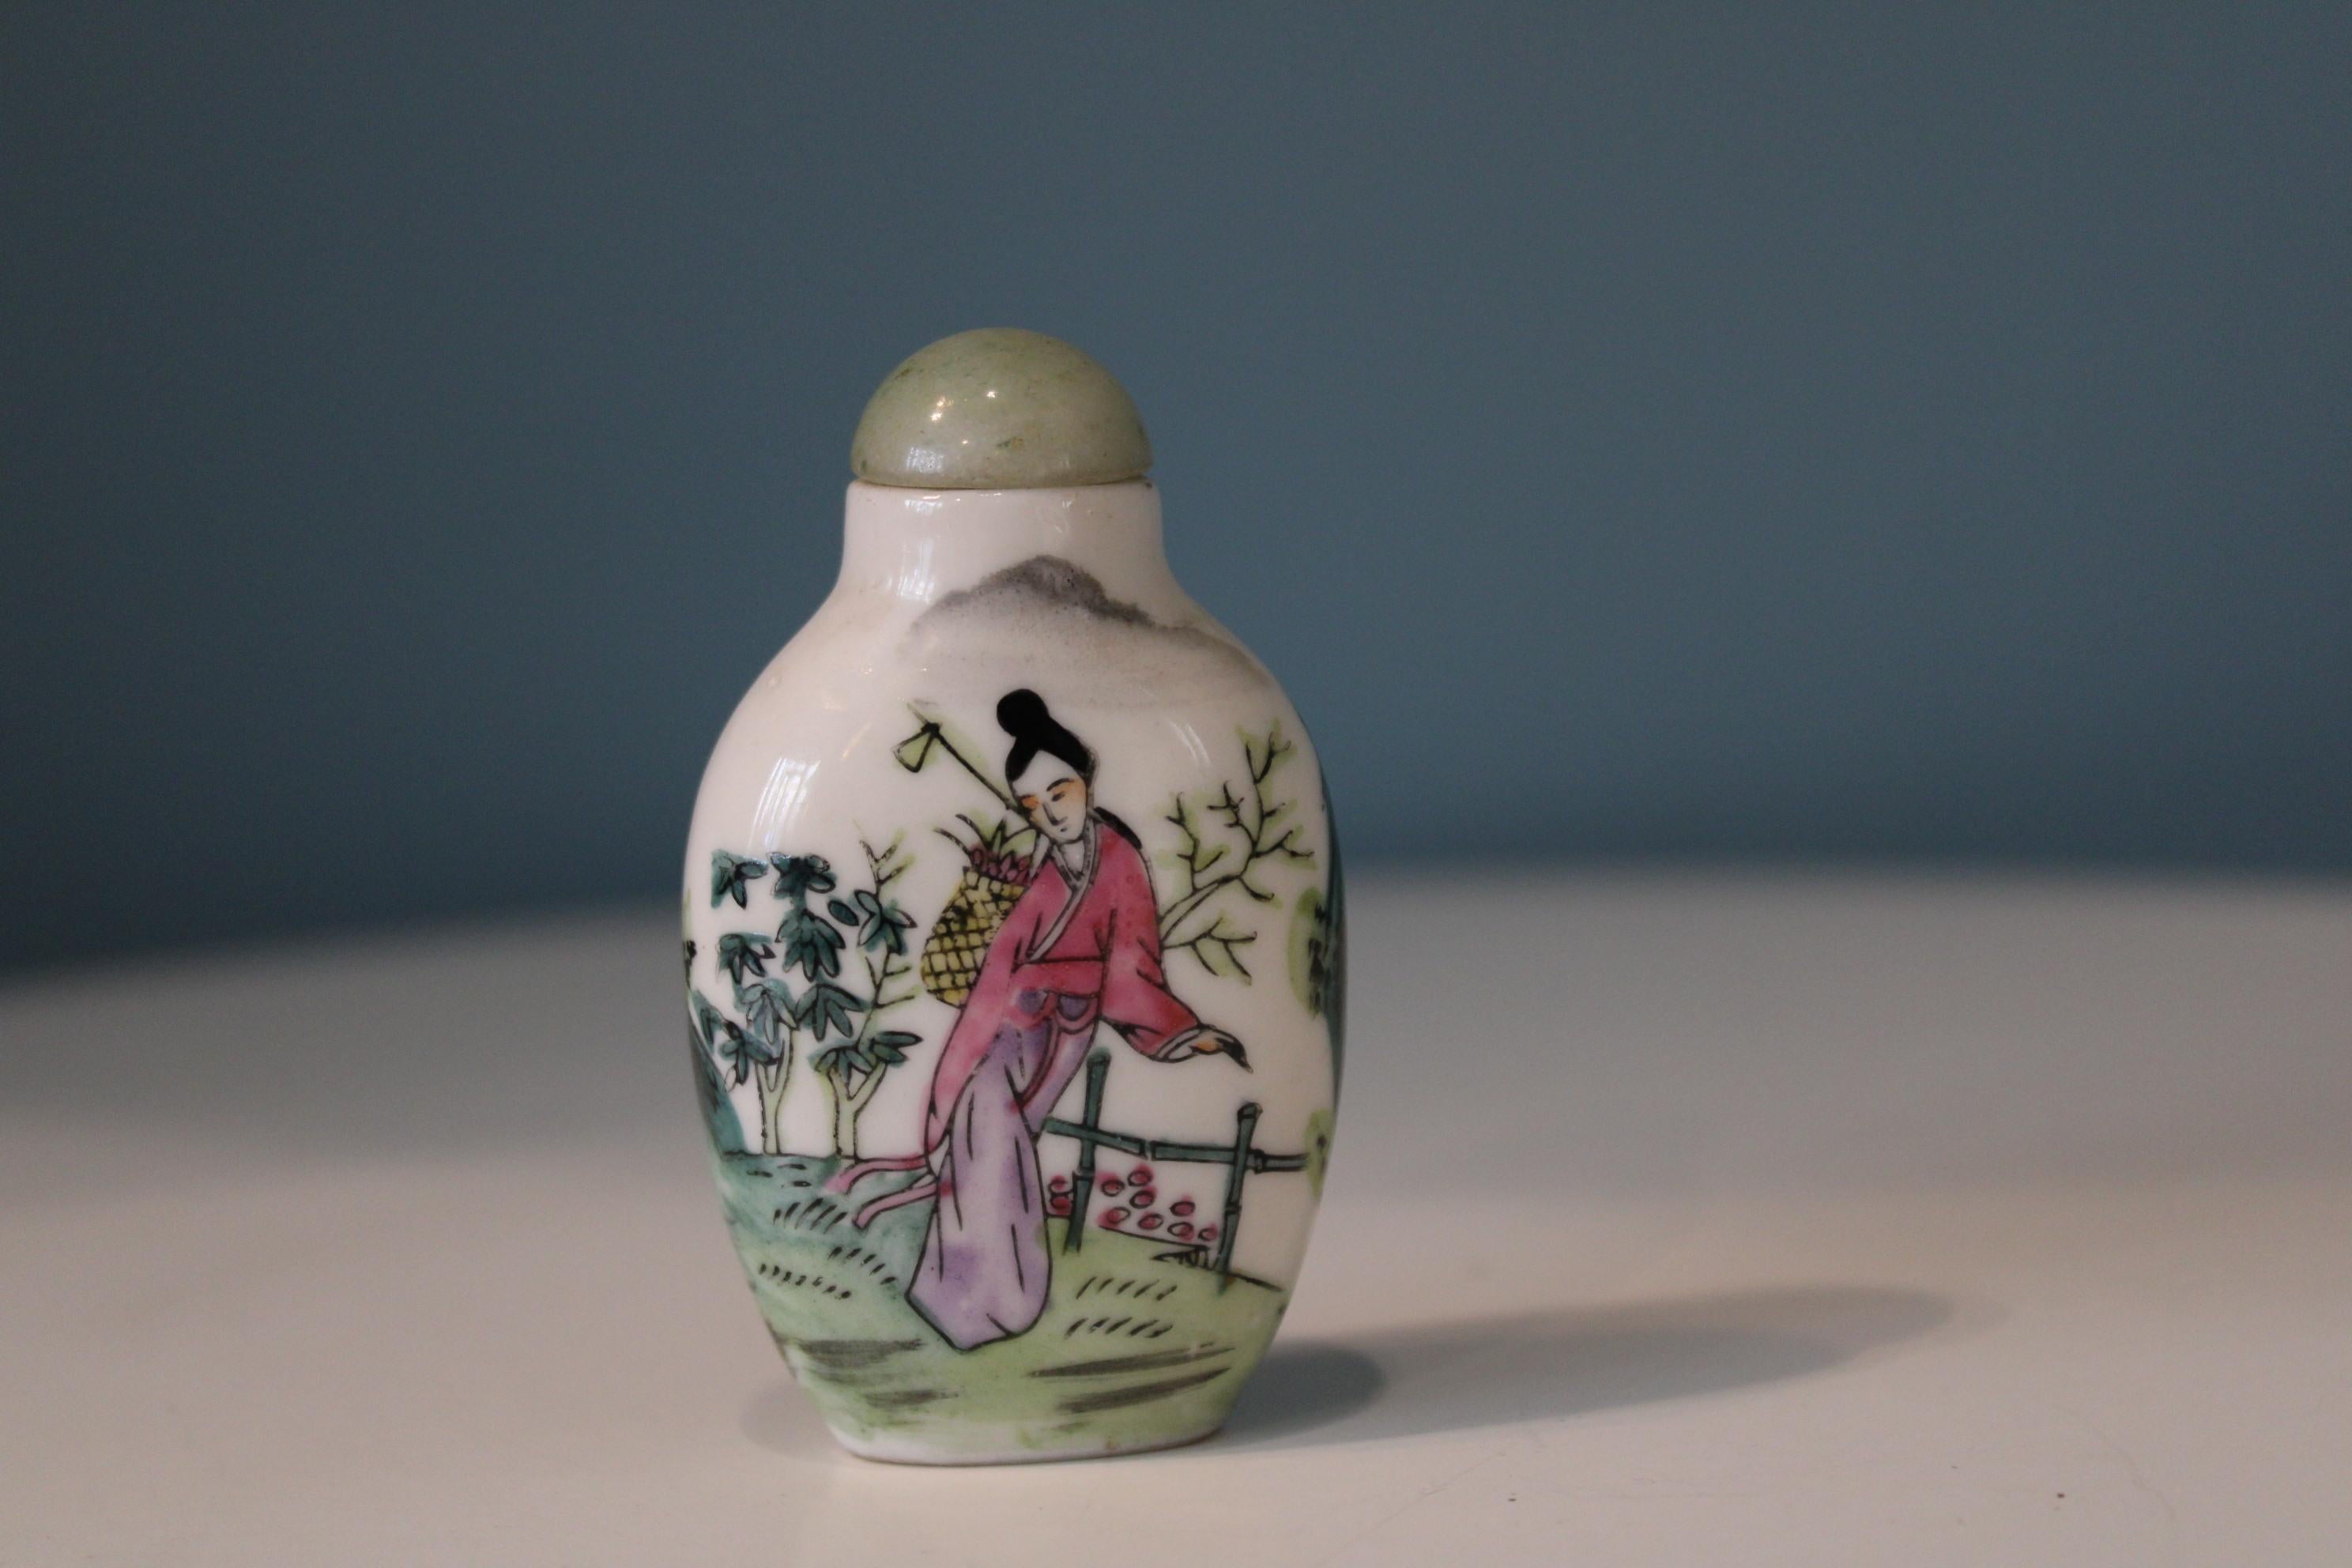 Porcelain Chinese snuff bottle.